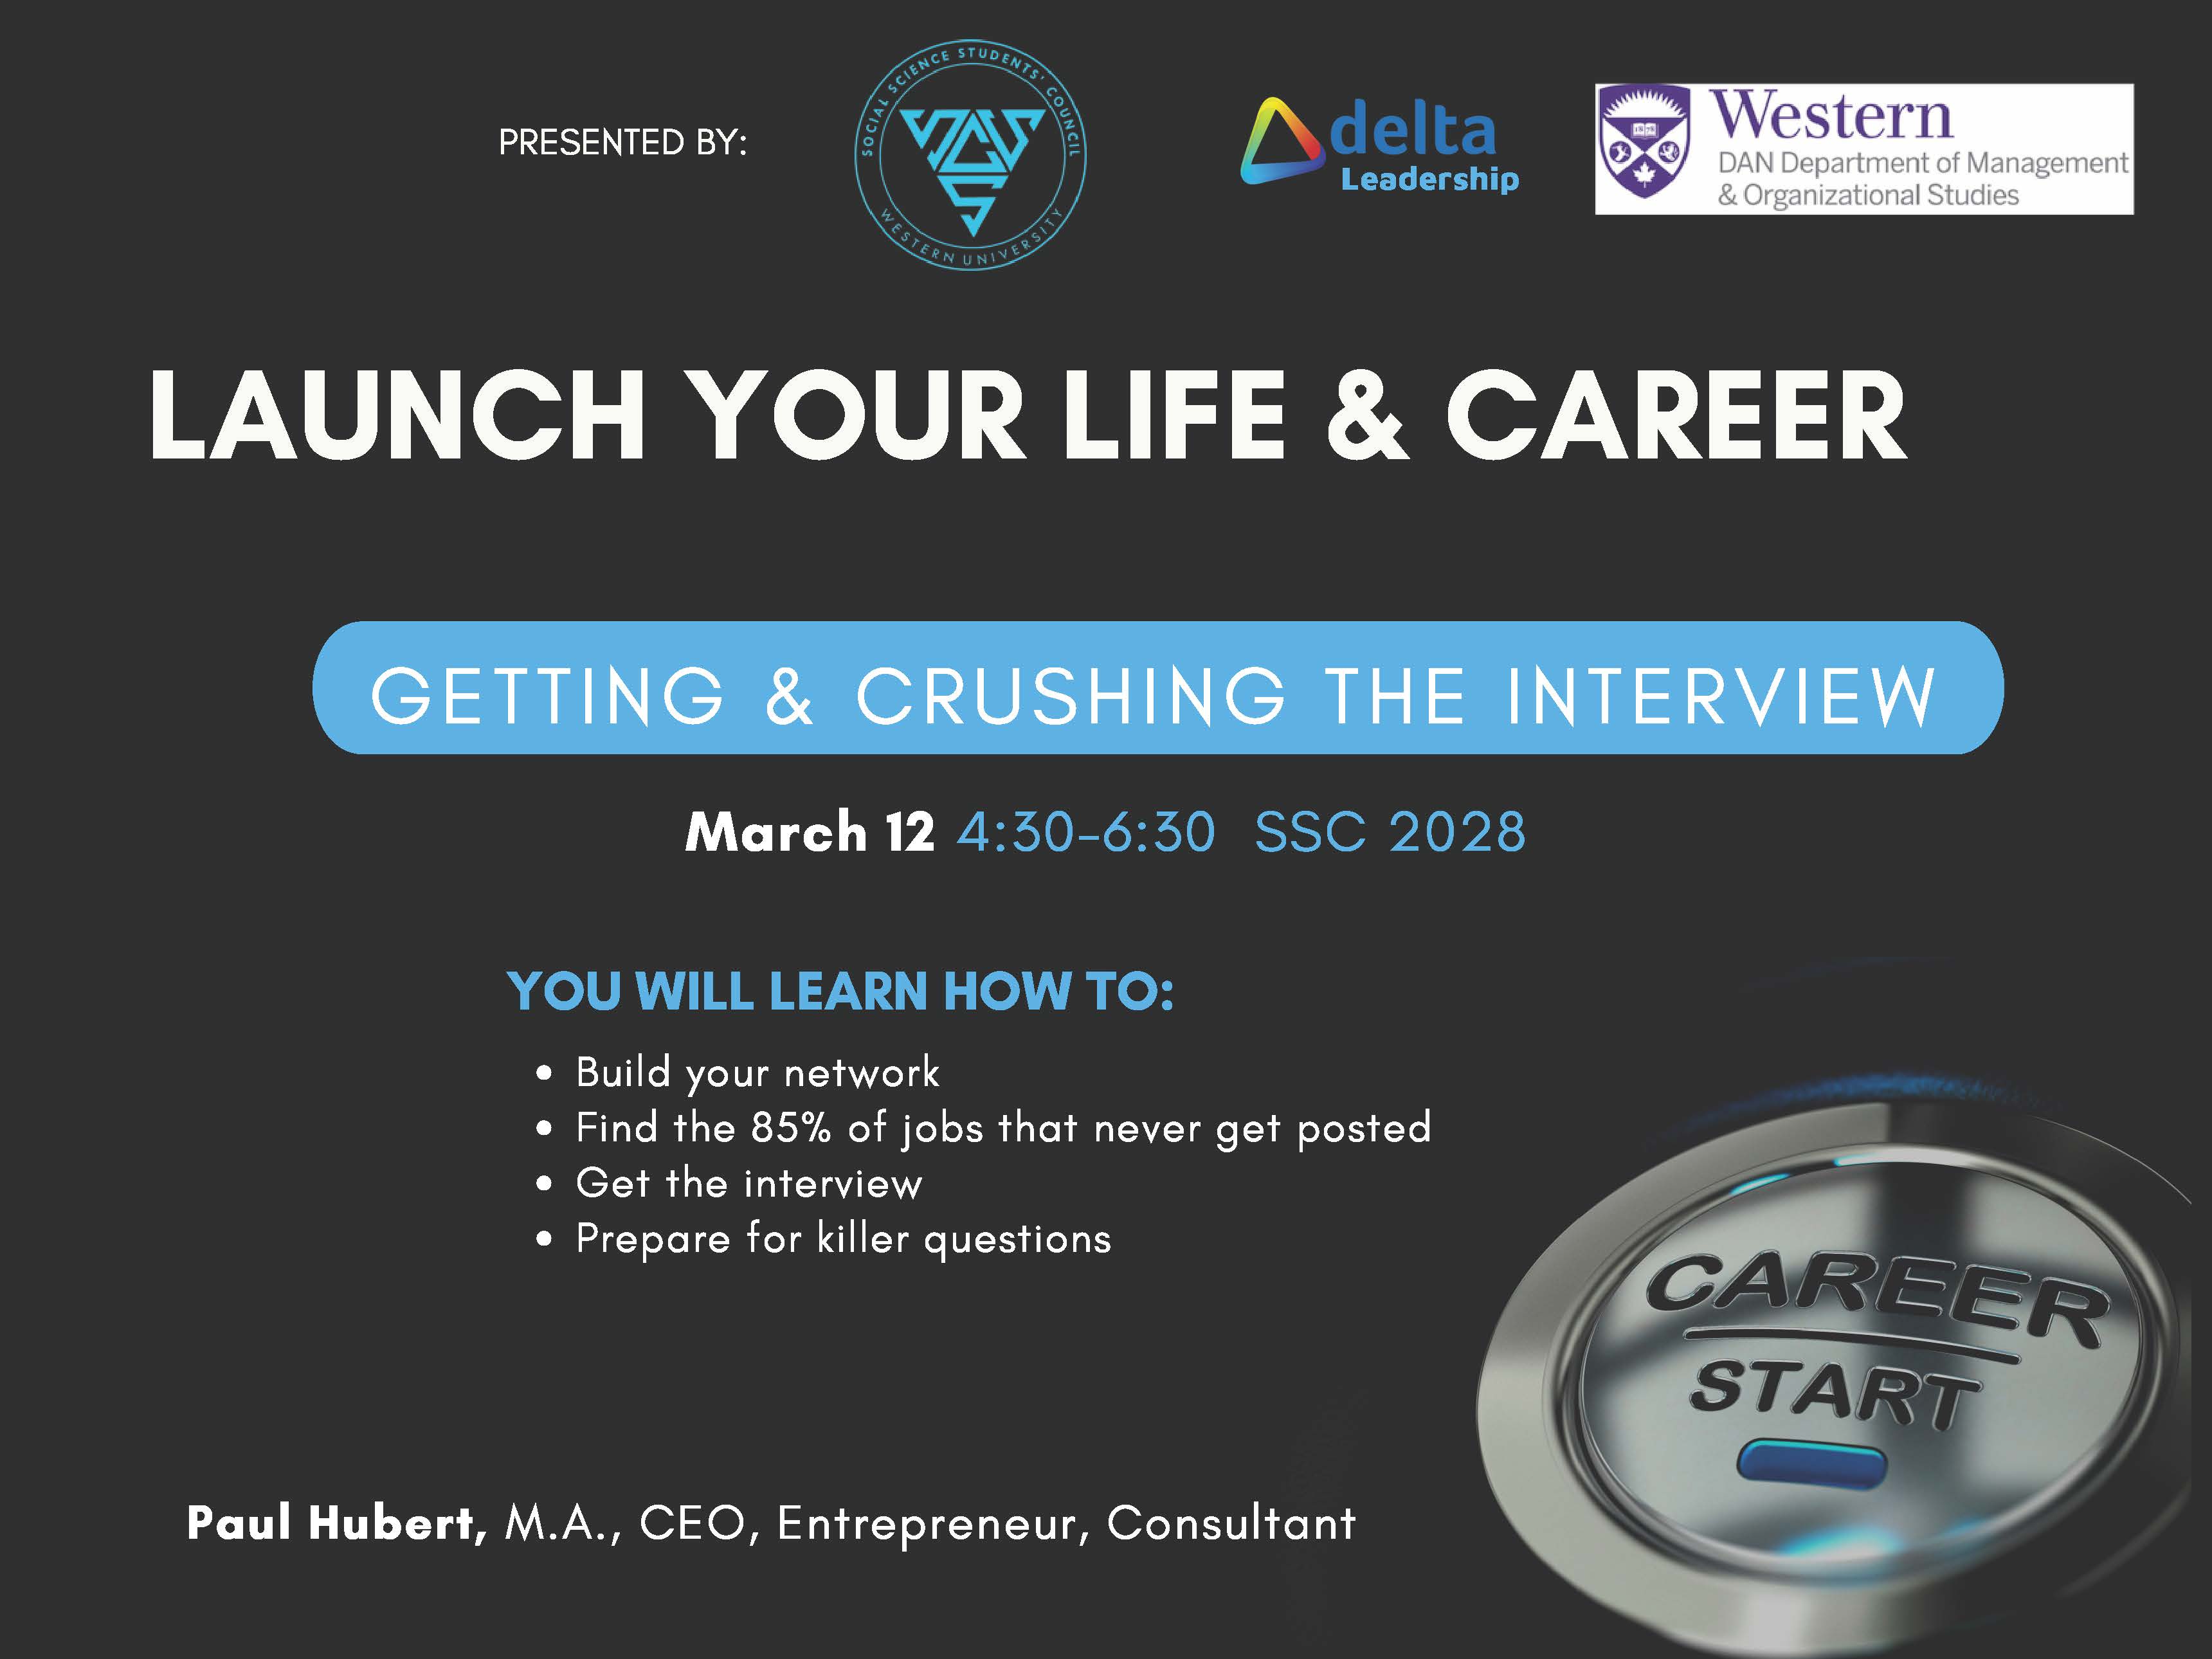 Getting and Crushing the interview; second part in the Launch your life and career series held on March 12